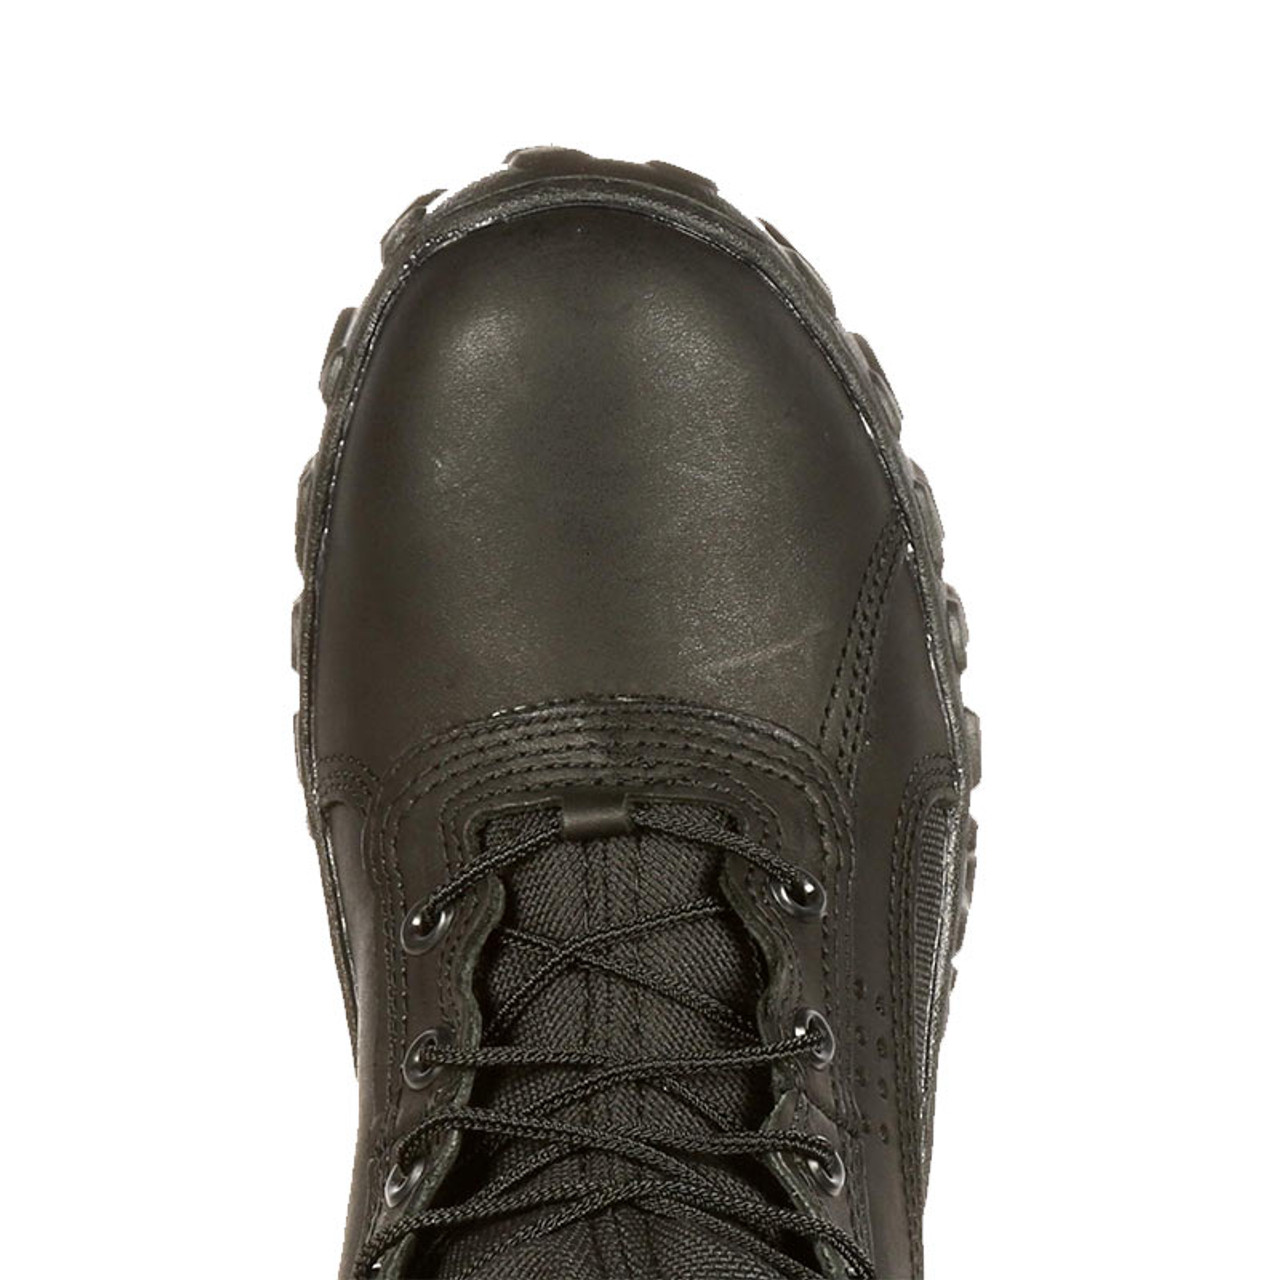 women's rocky tactical boots